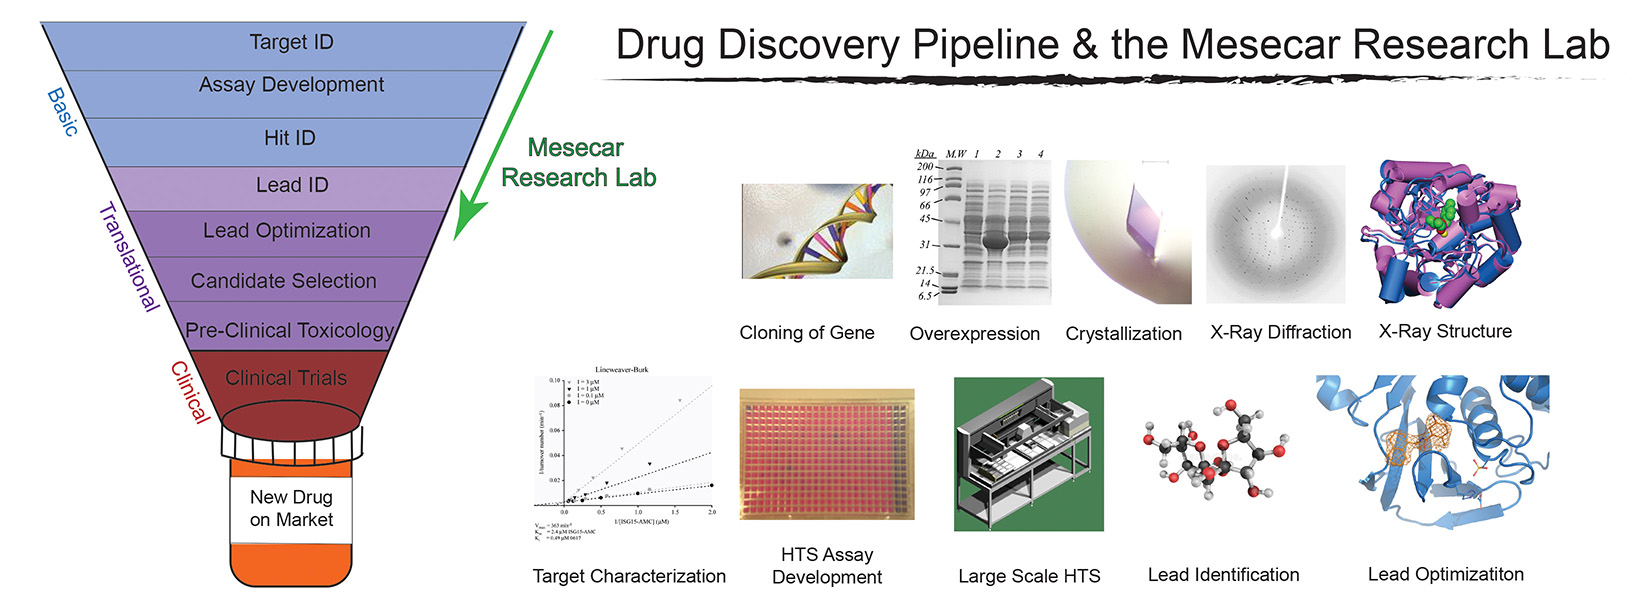 The drug discovery pipeline and the Mesecar research lab.